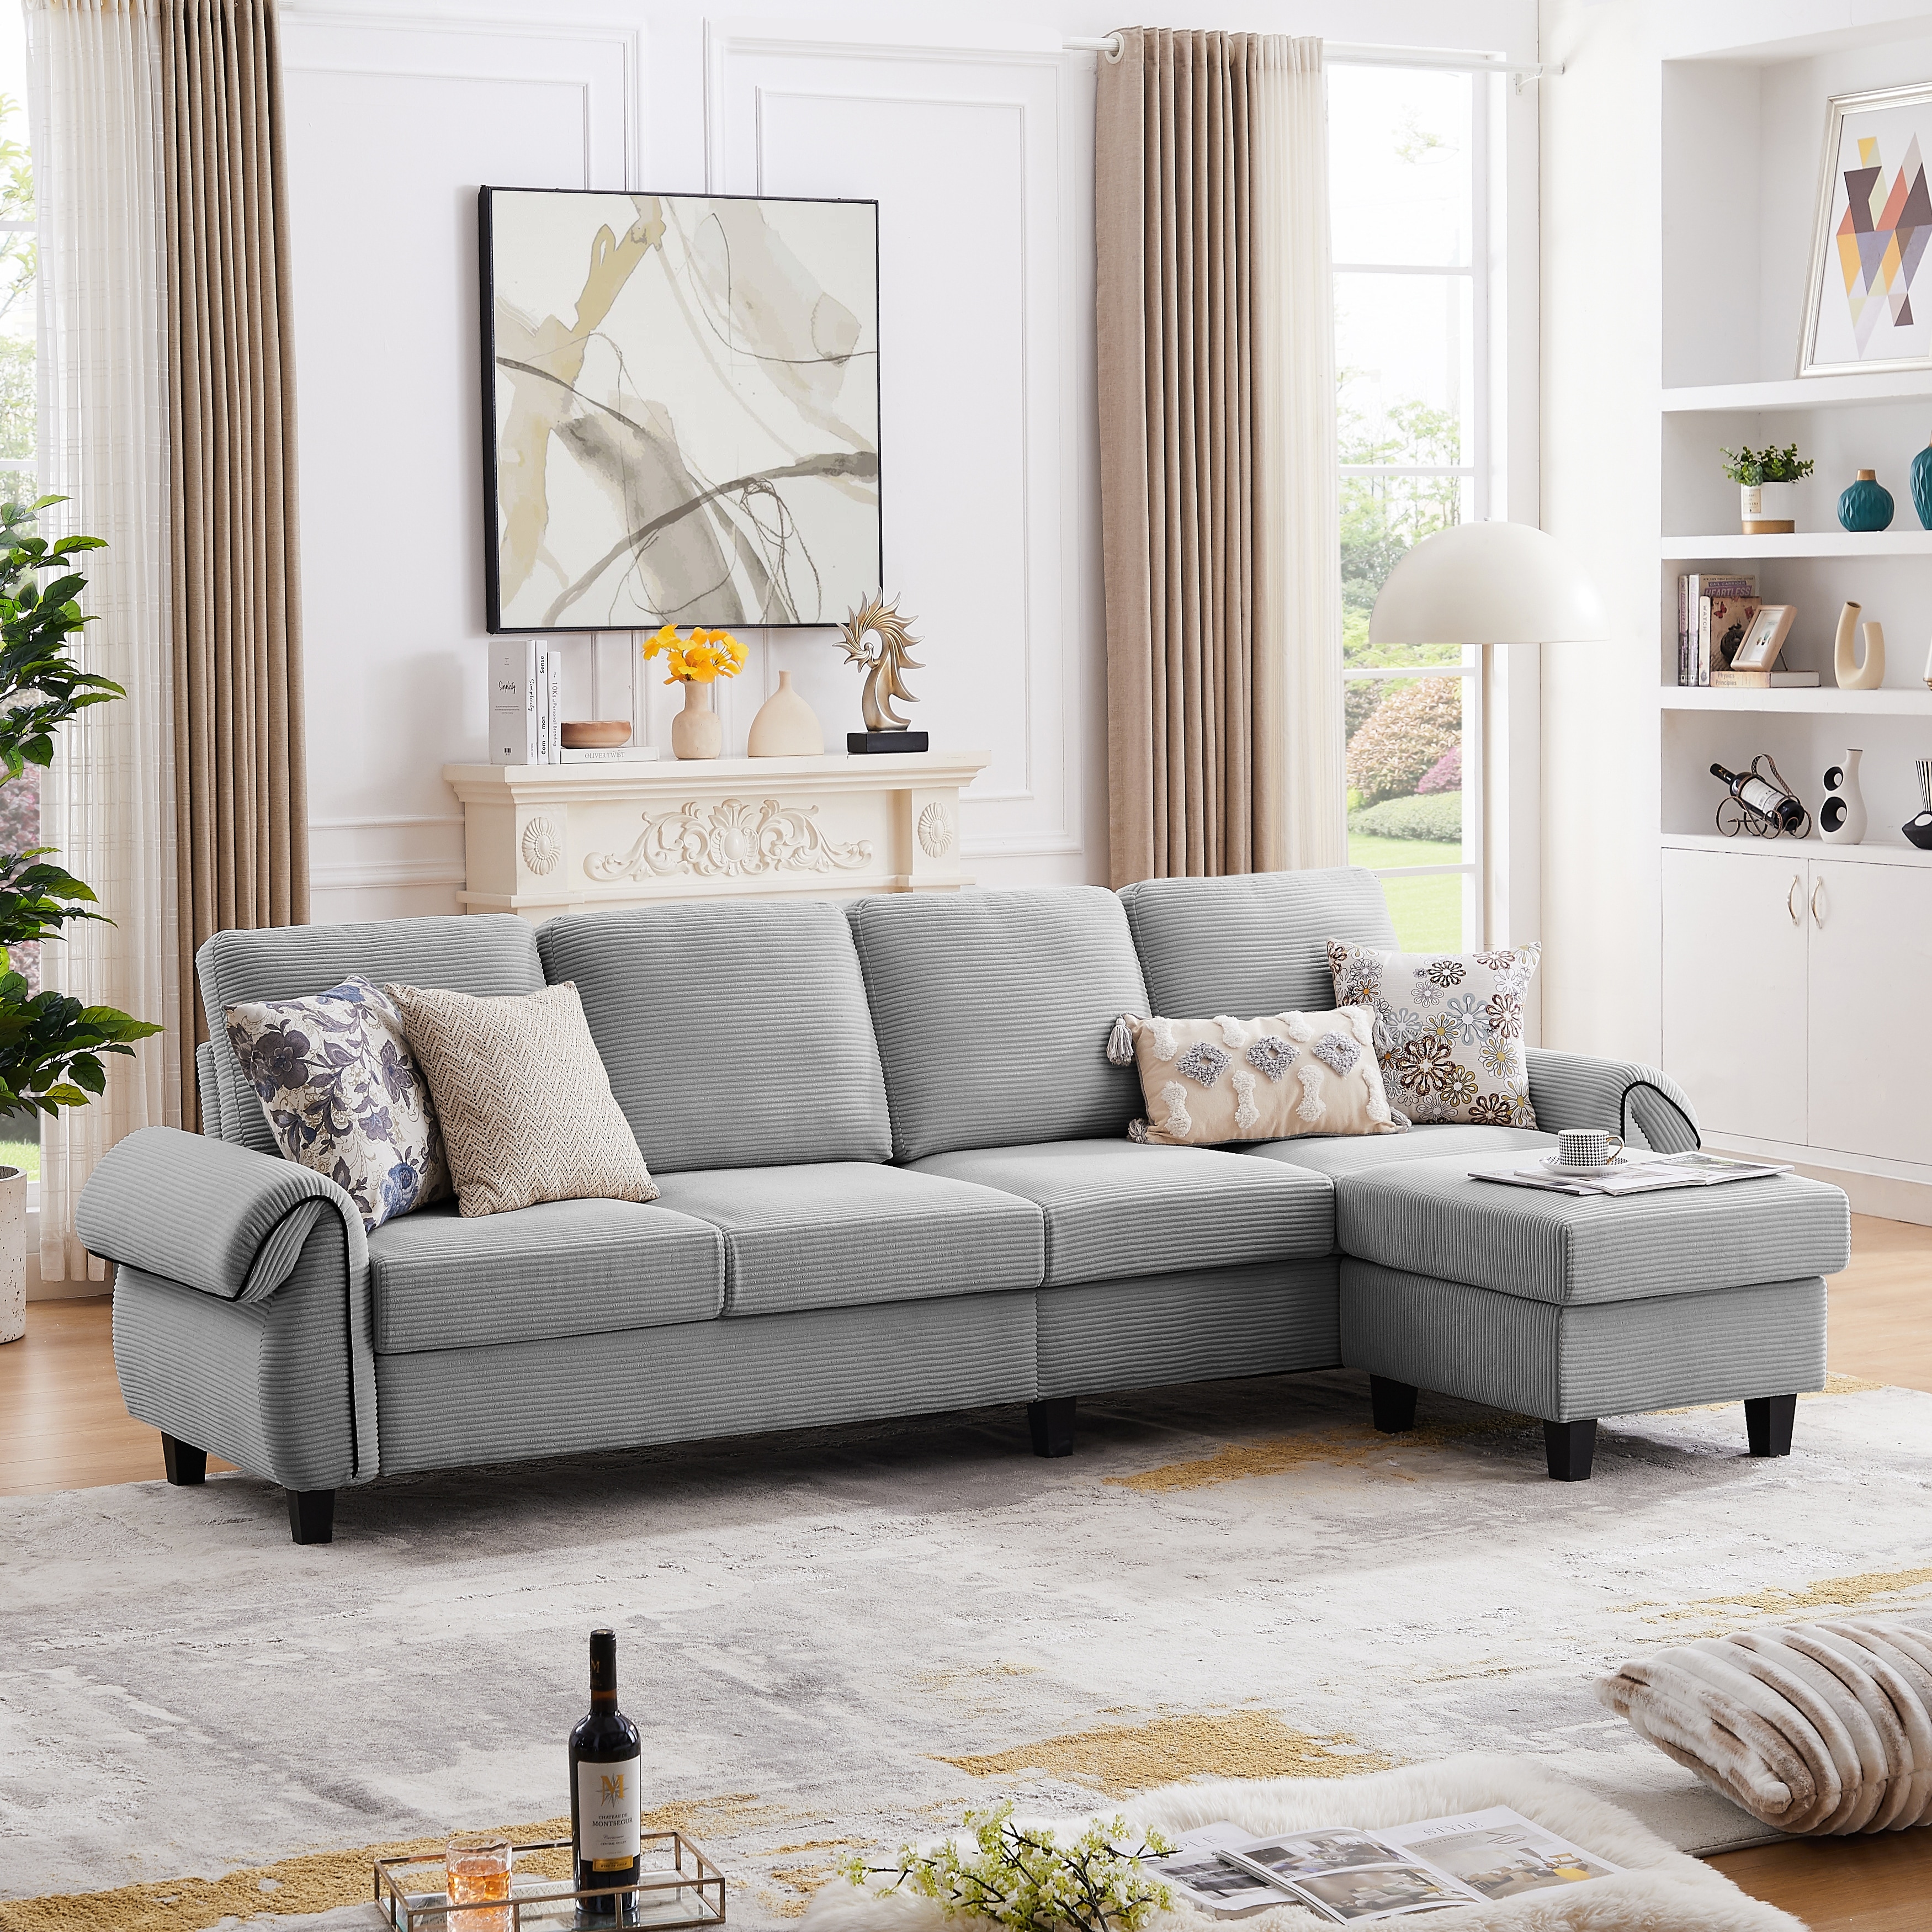 110.02 In. W Rolled Arms 4-seat L Shaped Soft Corduroy Fabric Modern Sectional Sofa With Reversible Ottoman